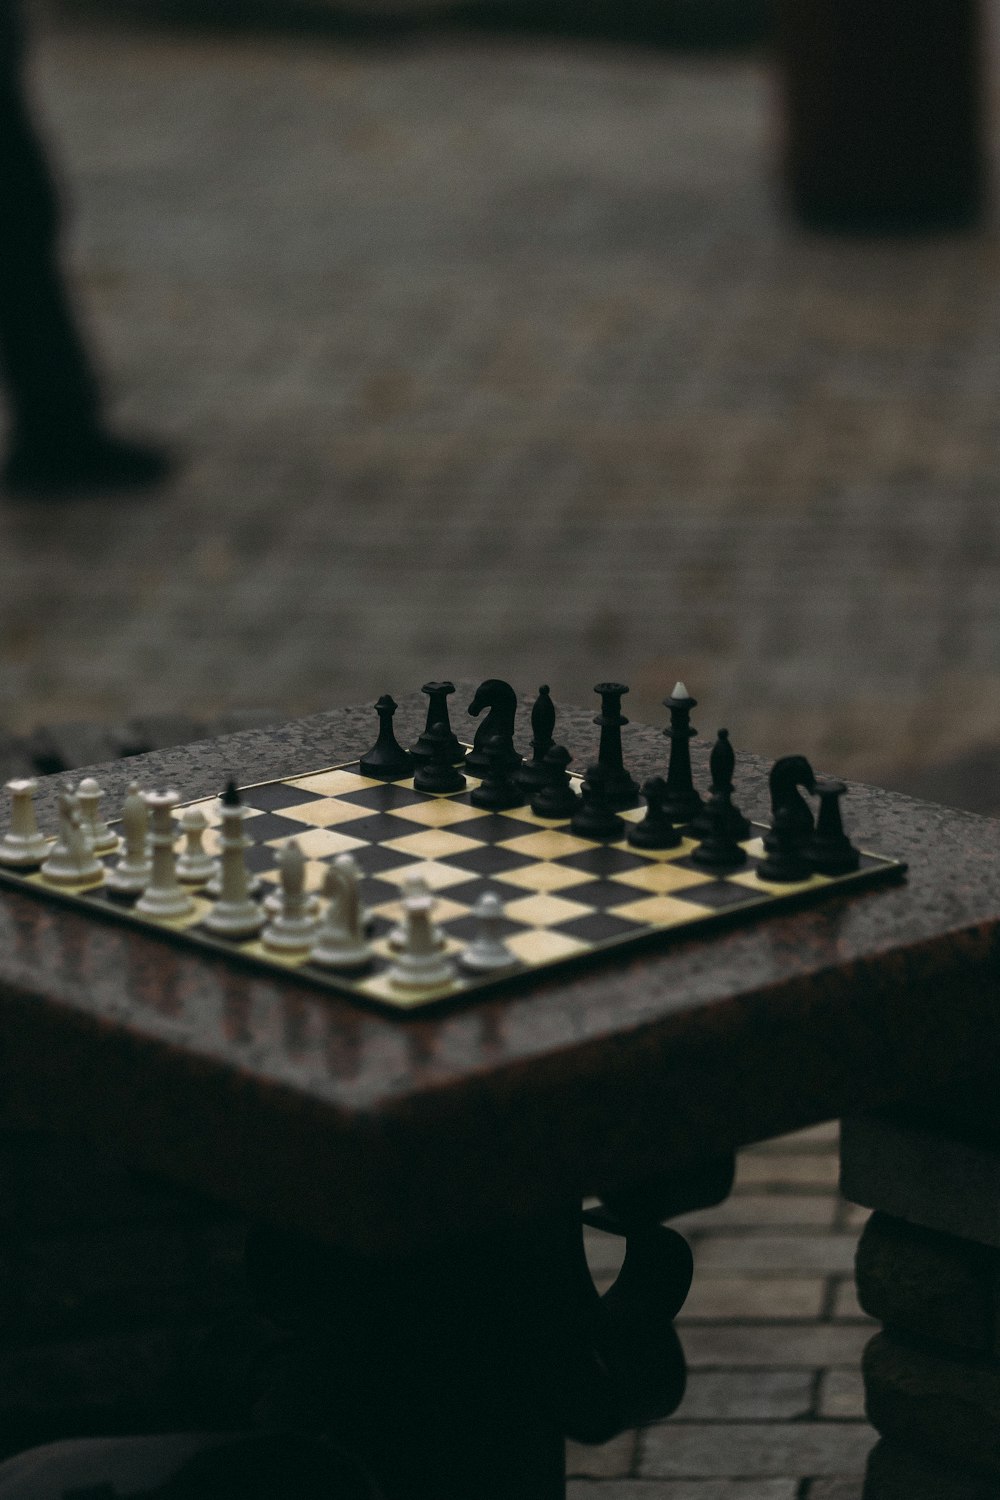 A chess board with pieces of chess on it photo – Chess Image on Unsplash